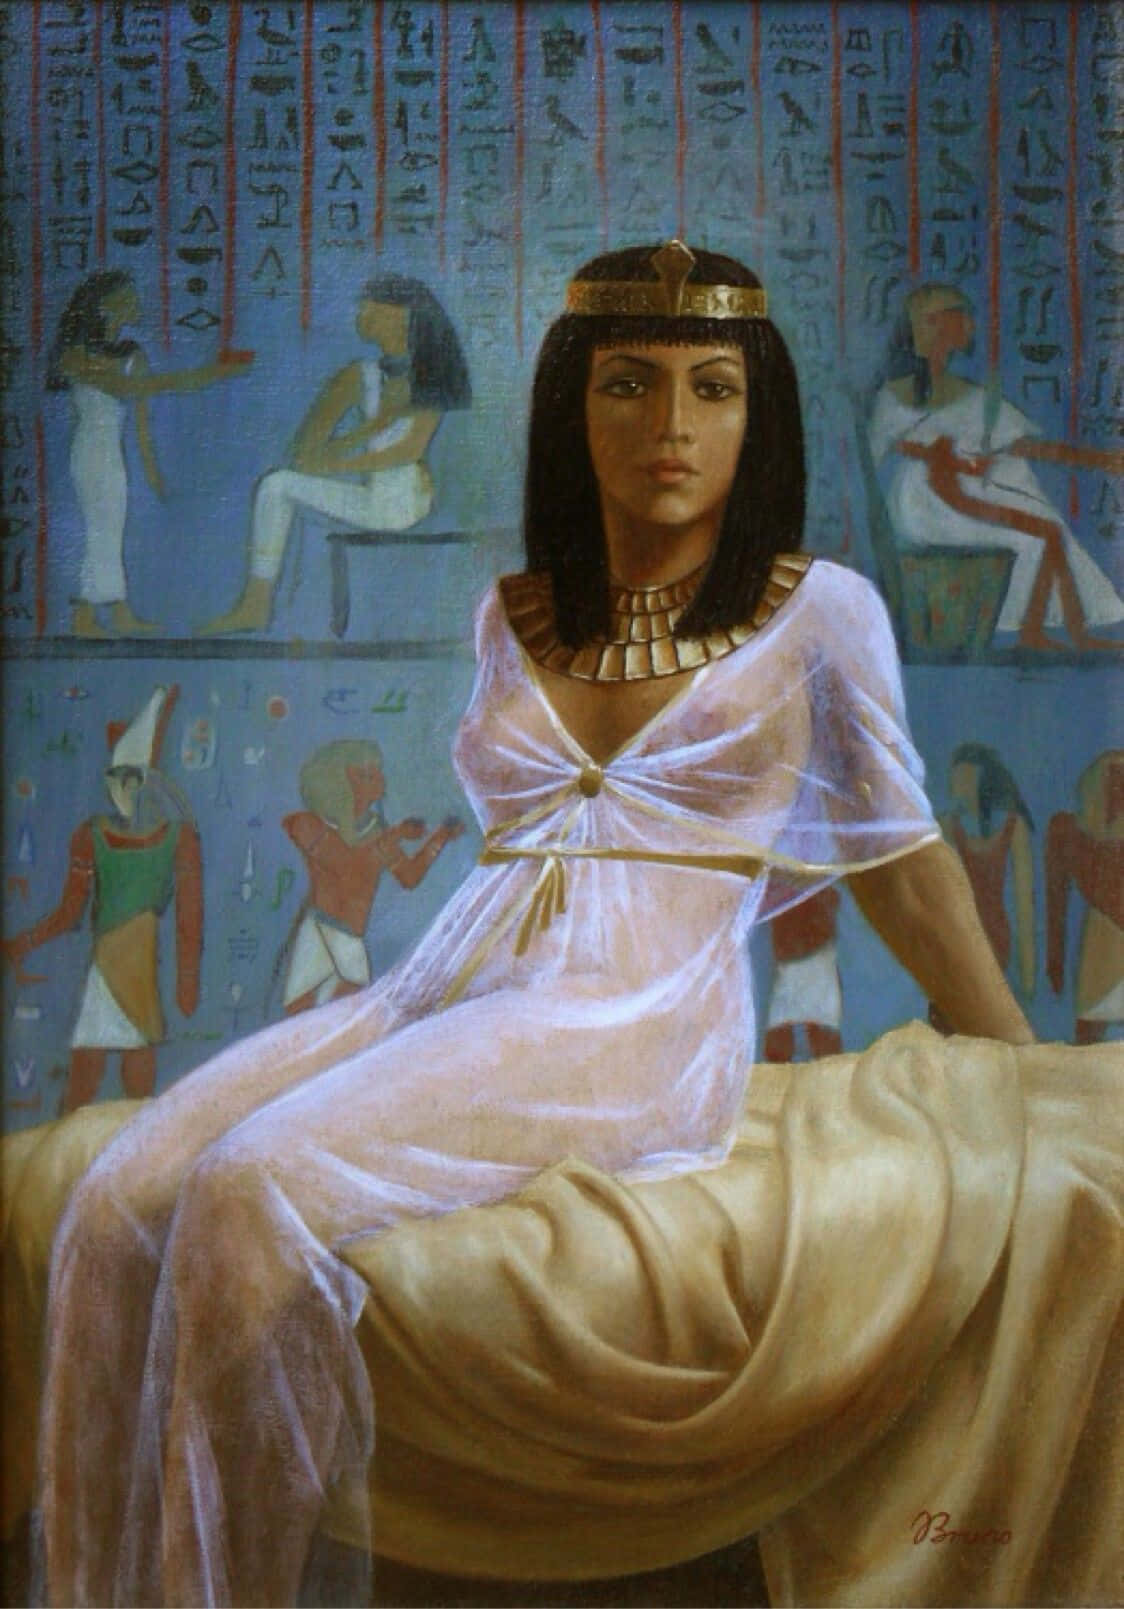 The powerful and iconic Pharaoh of Egypt, Cleopatra